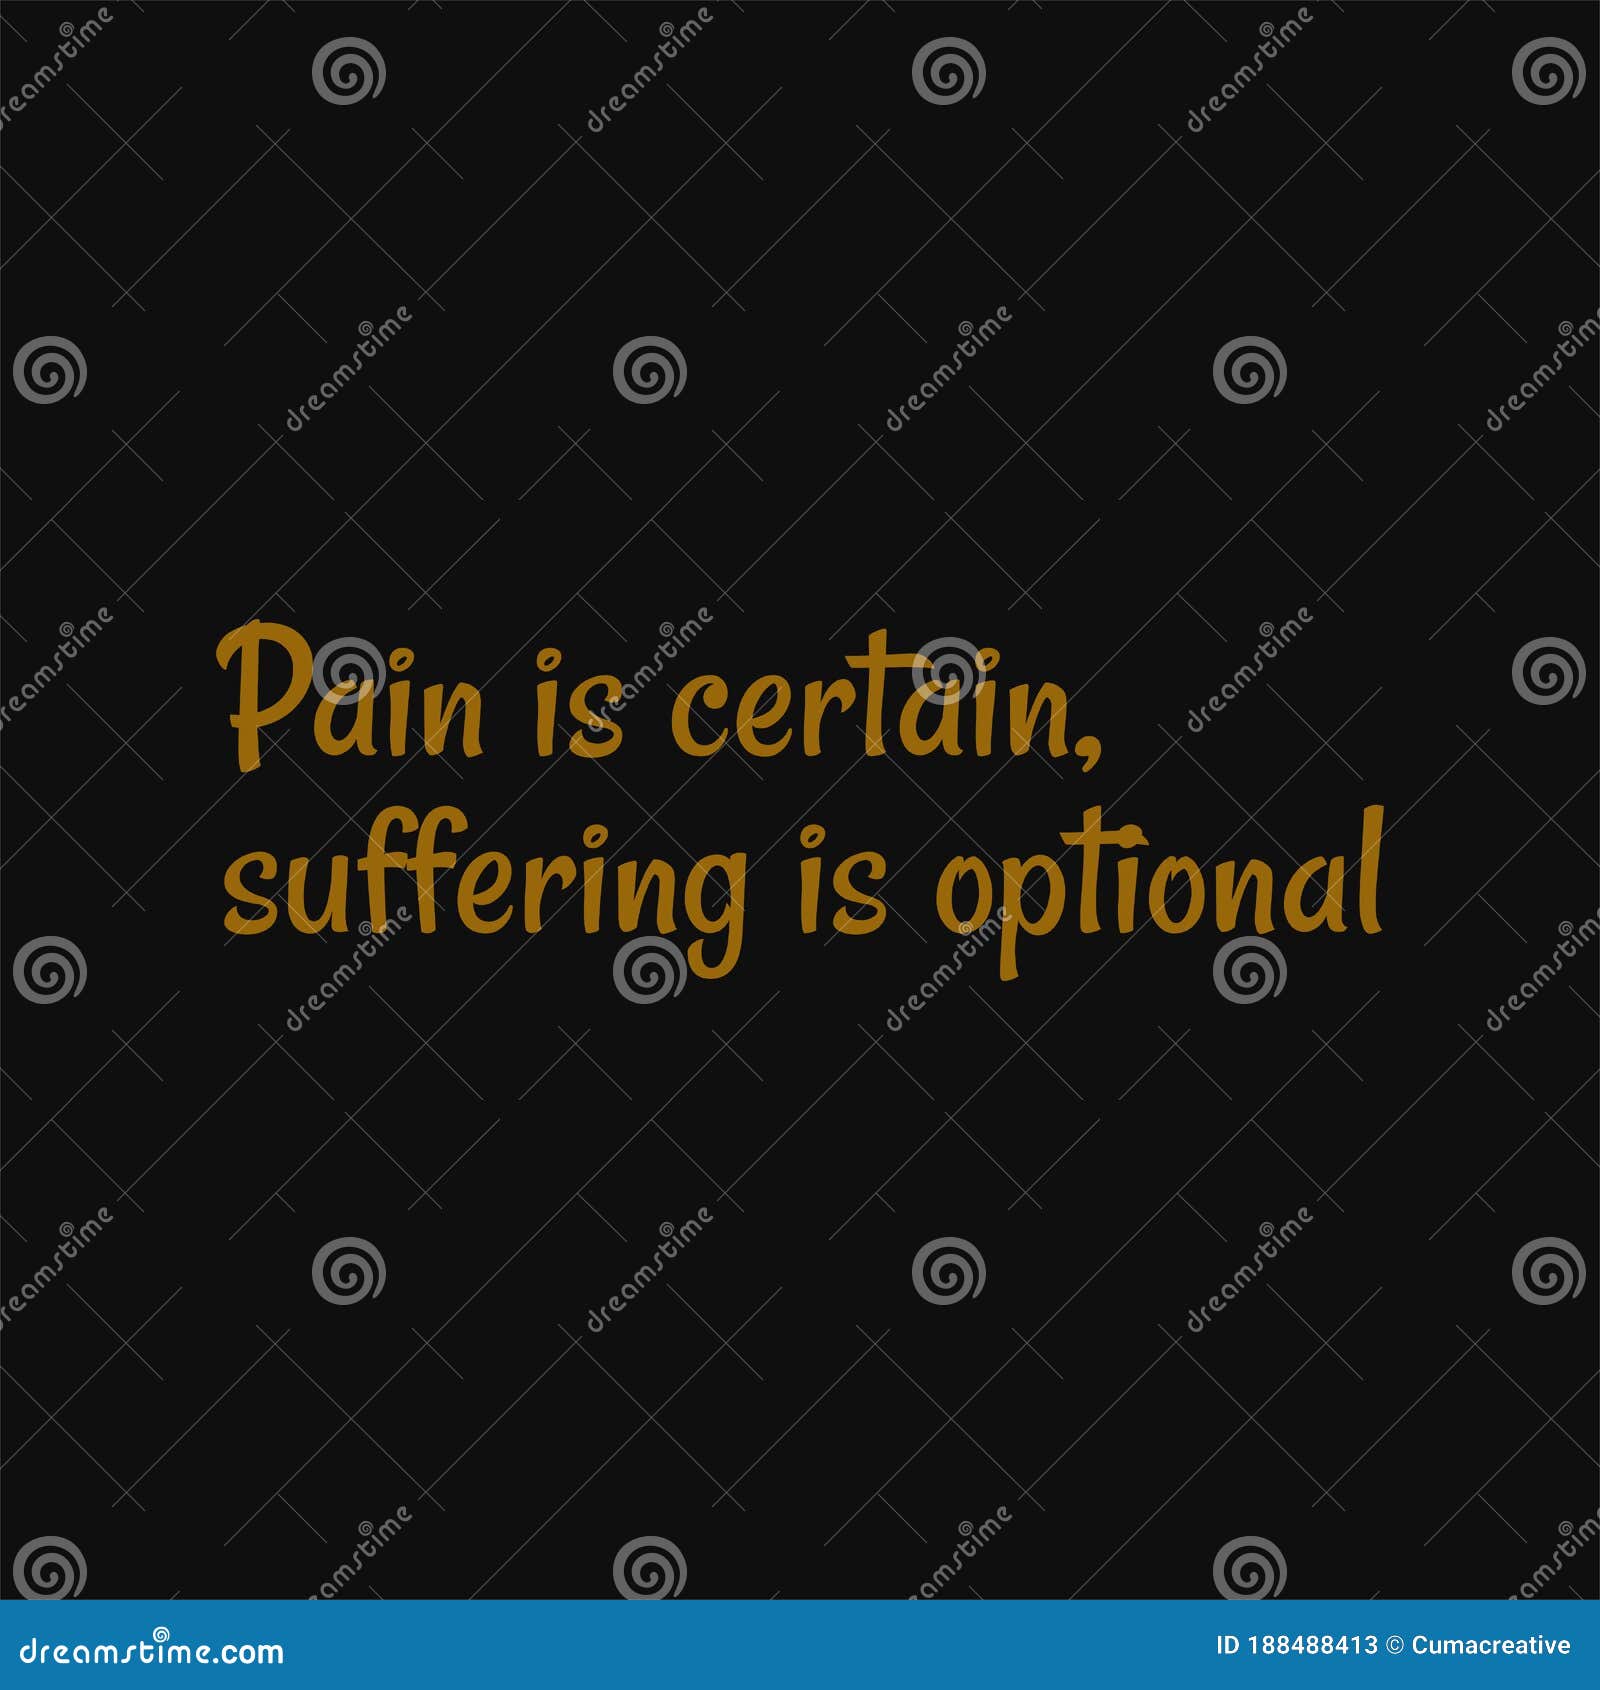 Pain Is Certain Suffering Is Optional . Buddha Quotes On Life Stock Vector  - Illustration Of Peaceful, Buddhist: 188488413